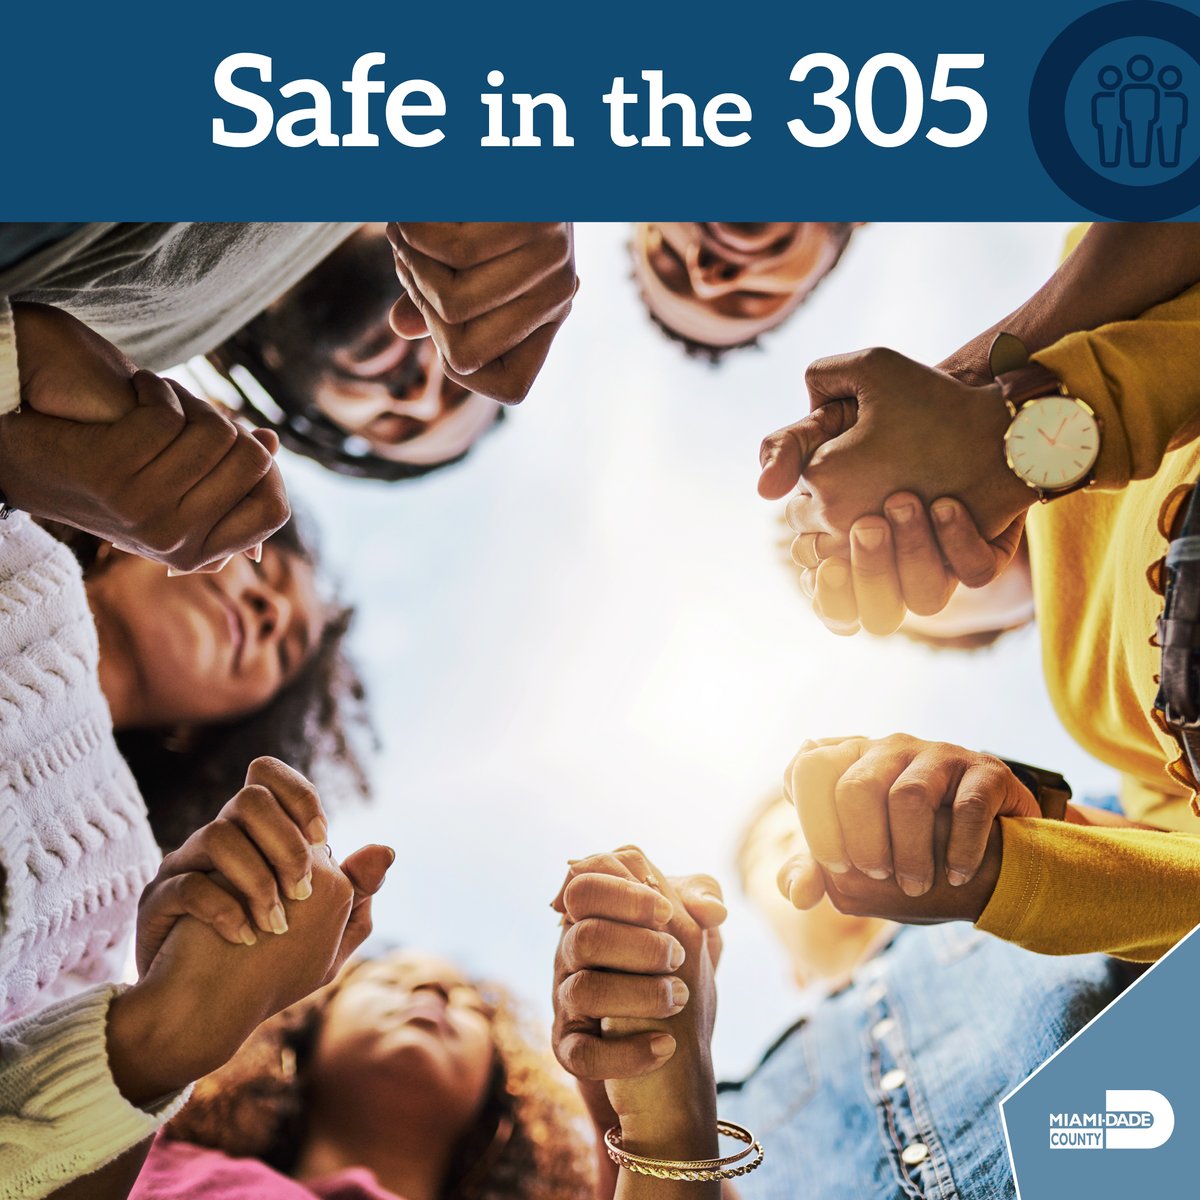 The Office of Neighborhood Safety (ONS) launched the second round of the Safe in the 305 grant program, which encourages safety in #OurCounty. View eligibility criteria and access the application at: bddy.me/44k8Spy @MayorDaniella @MiamiDadeCounty #Safeinthe305